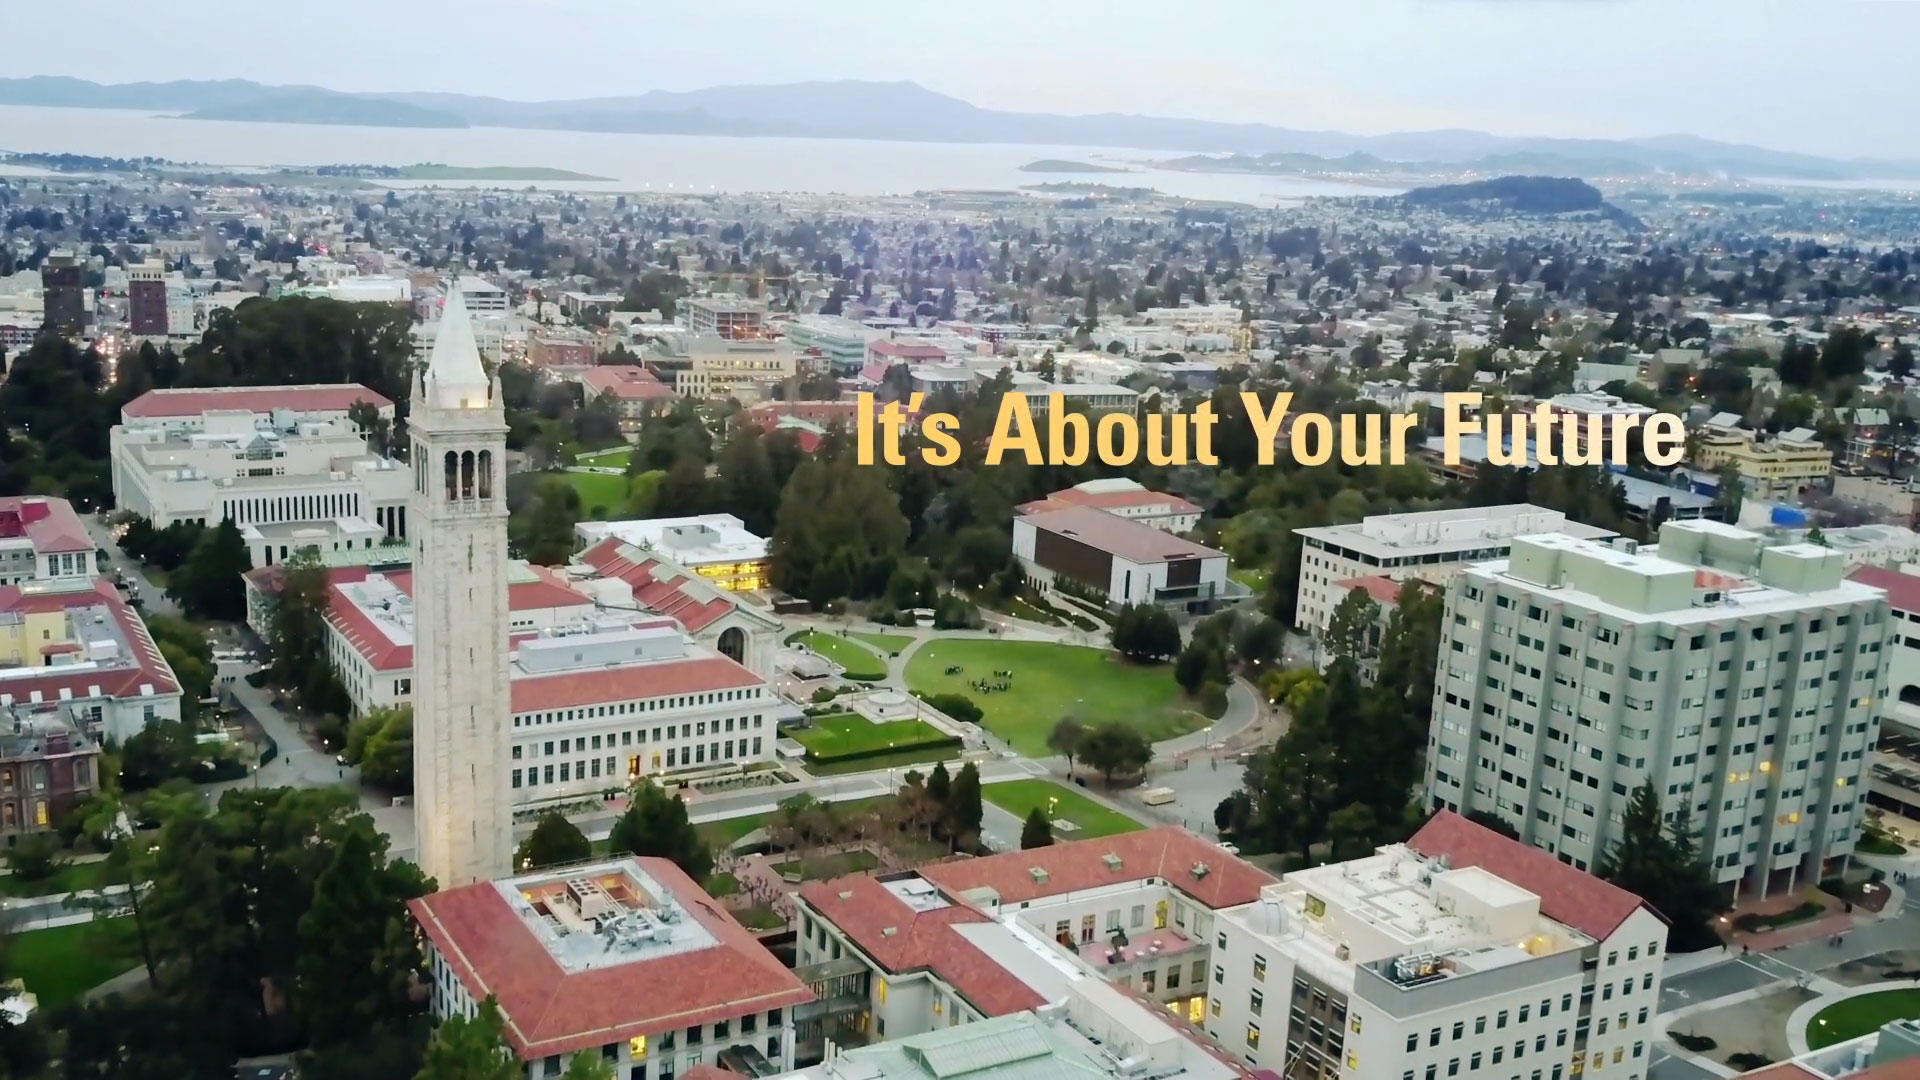 Learn practical skills from industry-leading professionals. Add Berkeley-quality education to your résumé with online courses and certificates.